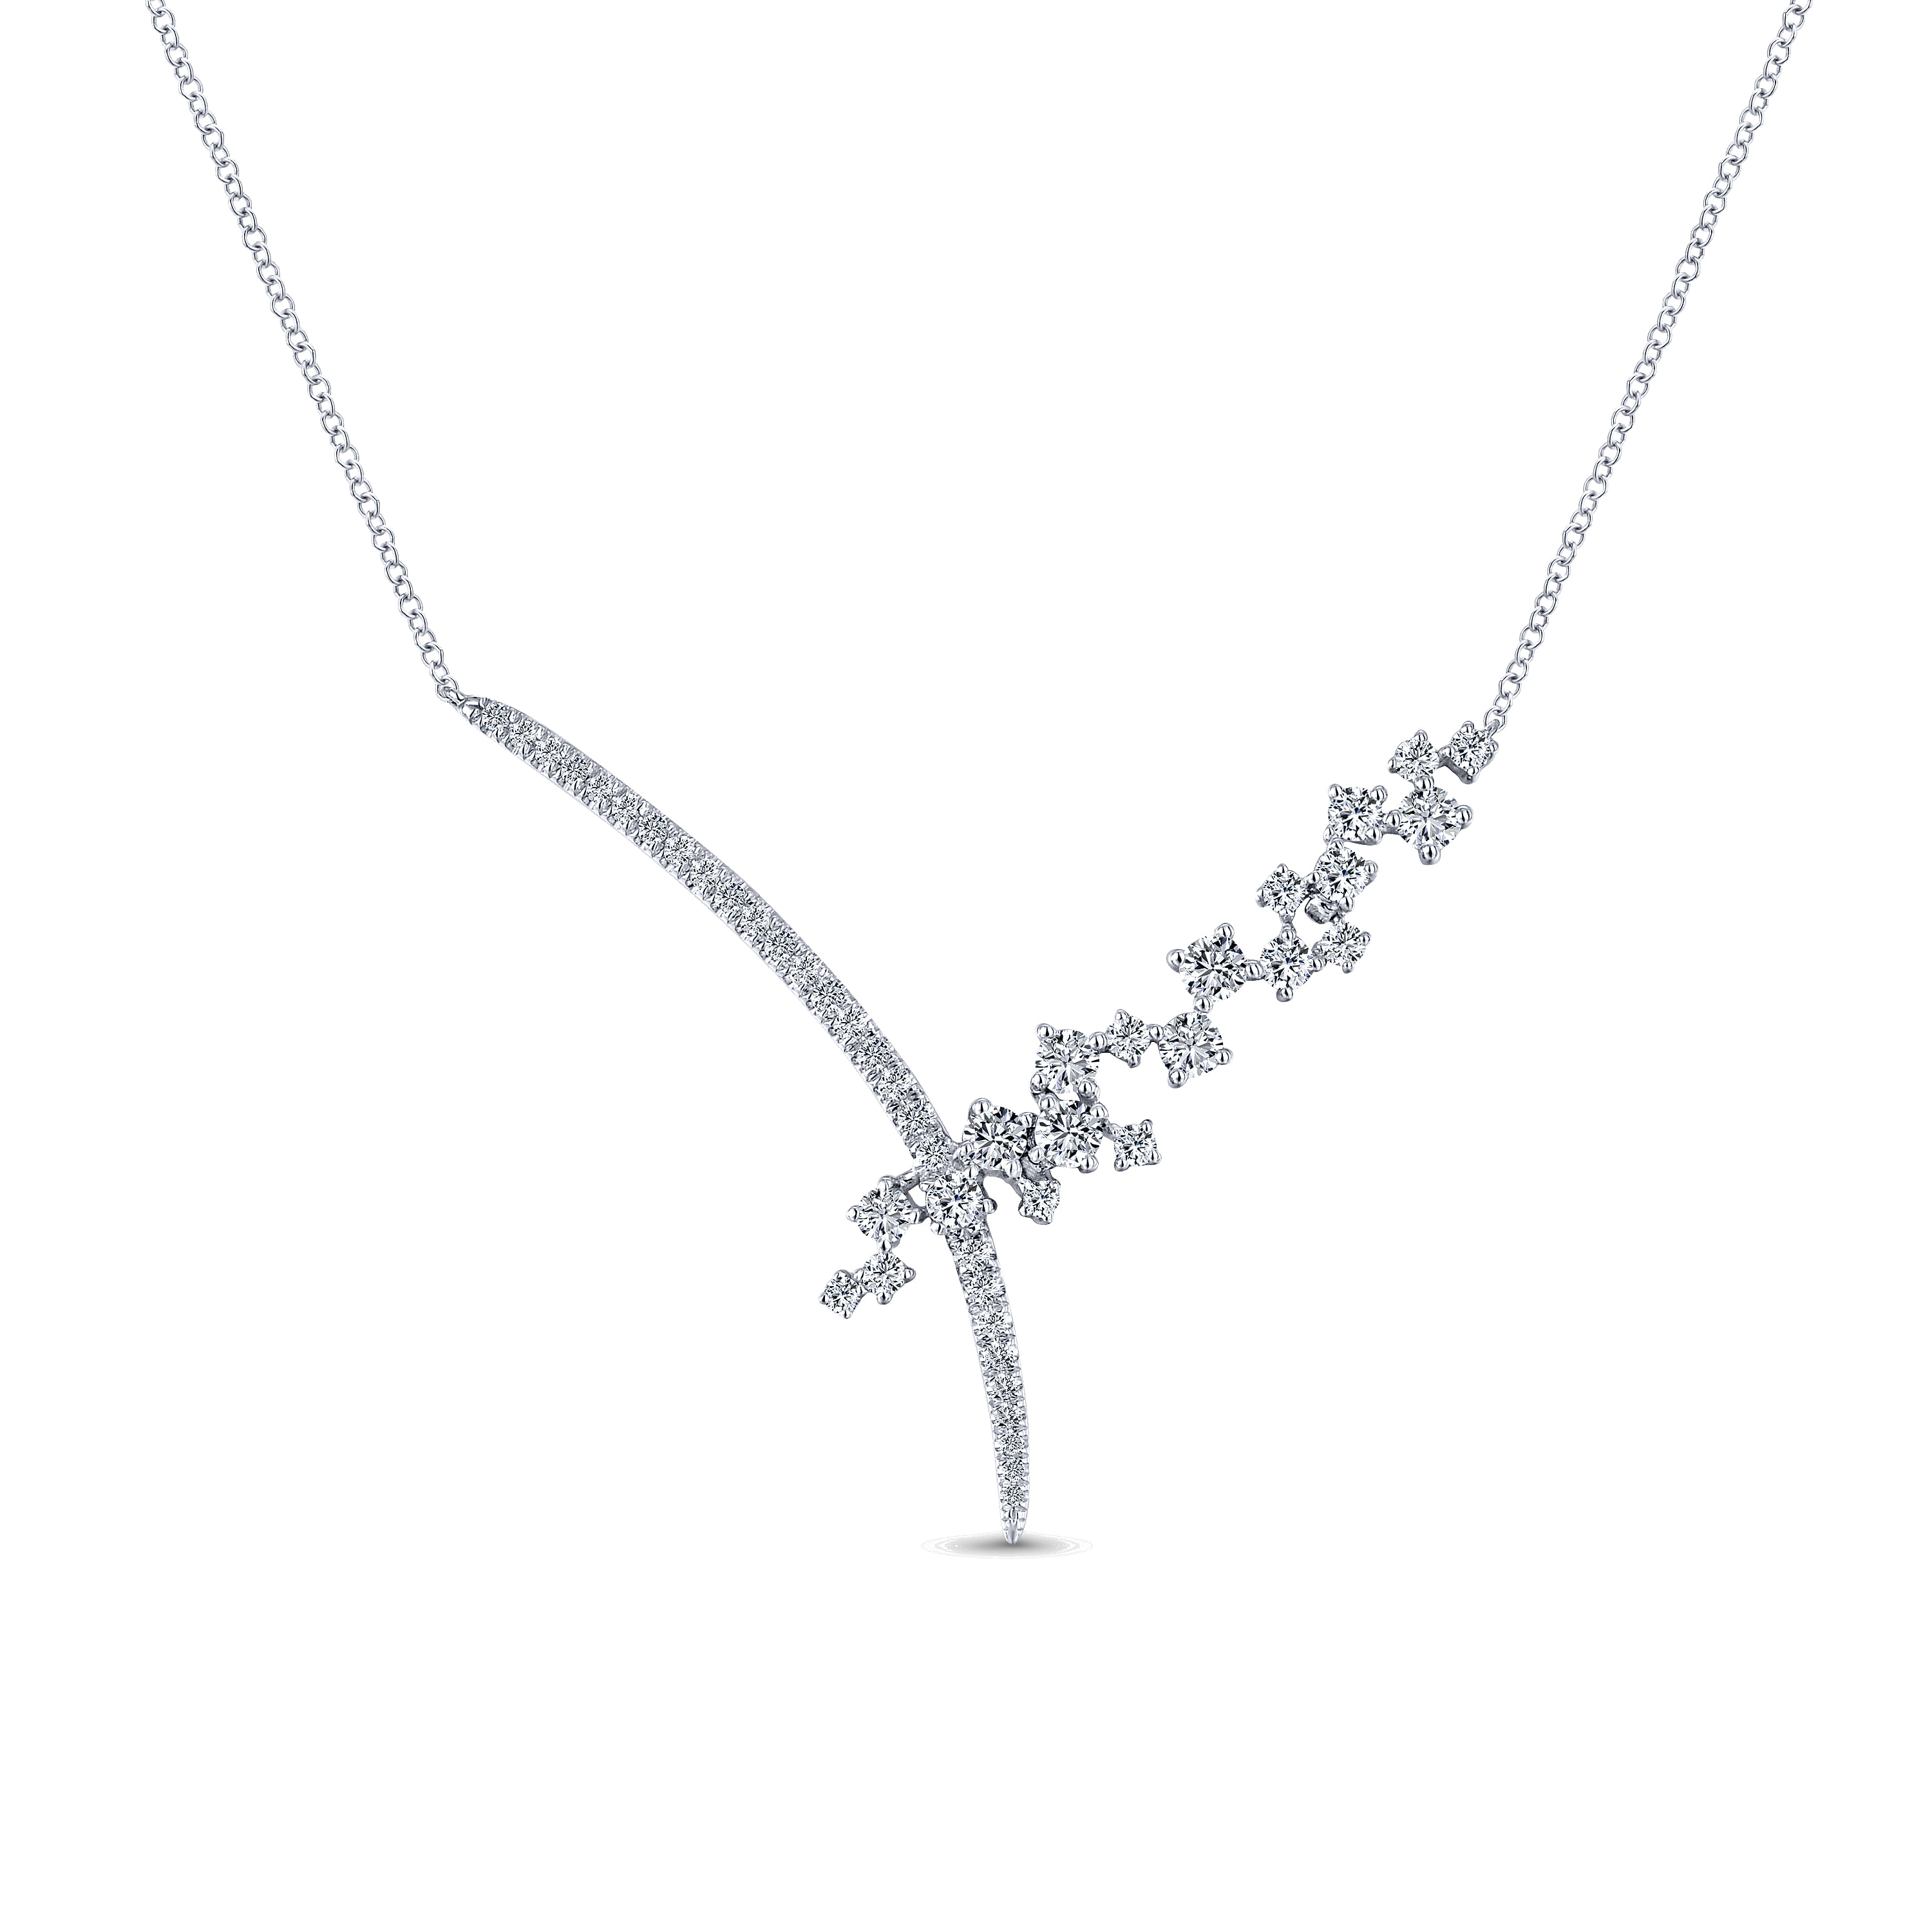 18K White Gold Criss Crossing Diamond Cluster Lariat Necklace